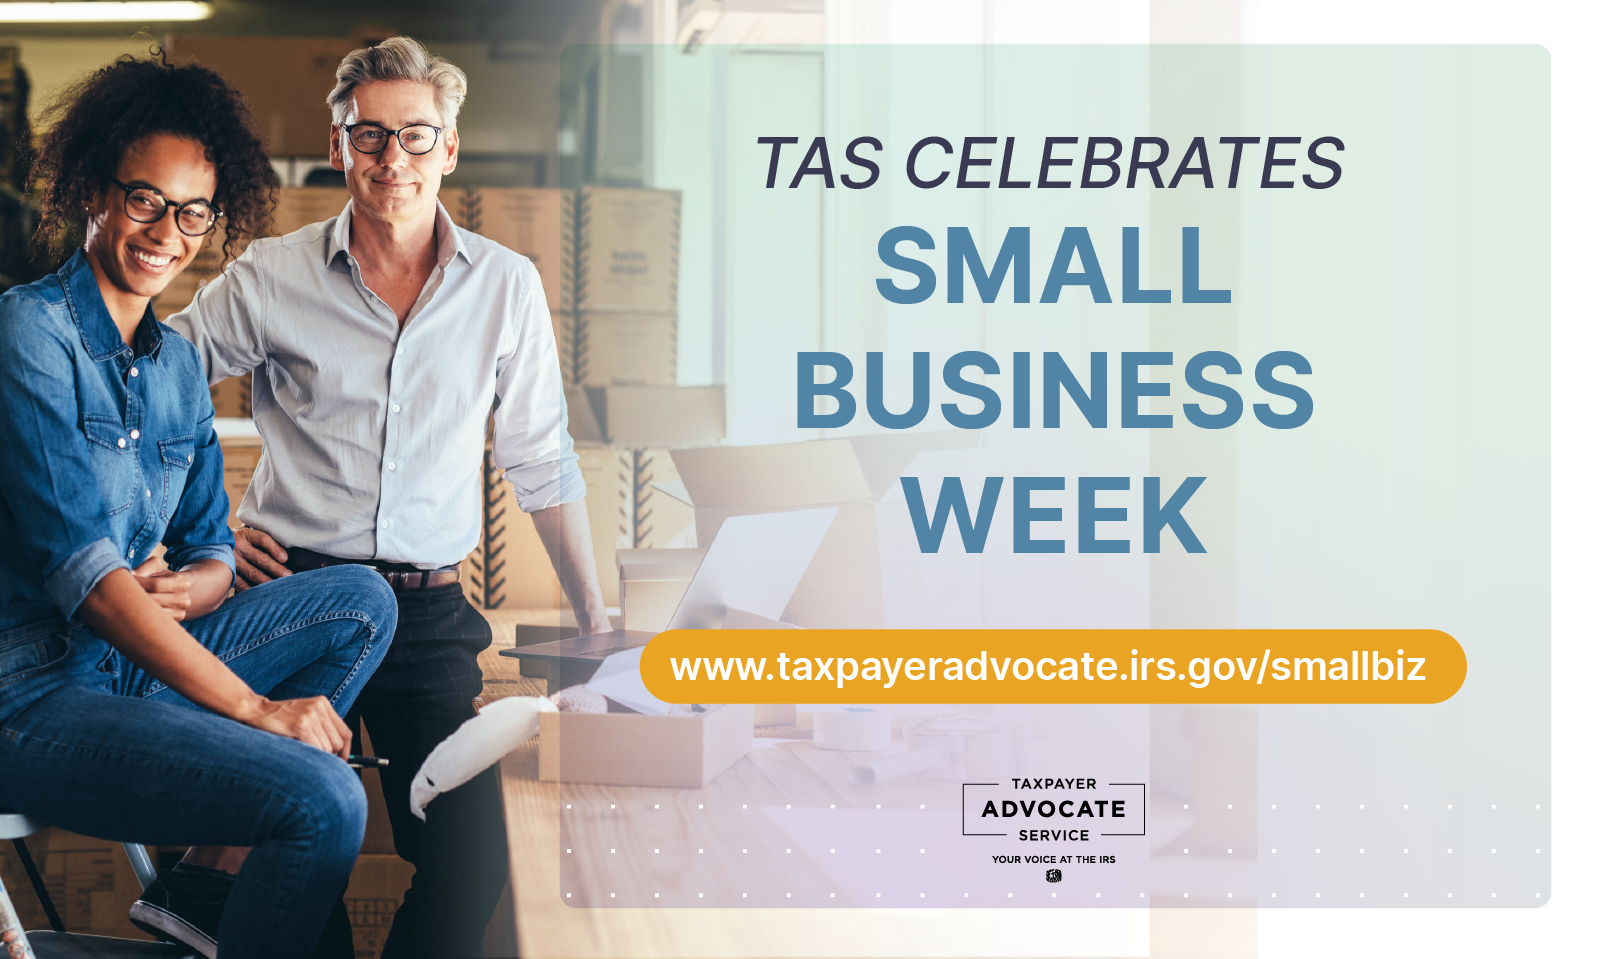 Seated smiling African-American woman dressed in denim shirt and pants, wearing glasses; smiling White man, wearing glasses, white long sleeve shirt and black pants; surrounded by boxes, next to a working table; TAS celebrates small business week, www.taxpayeradvocate.irs.gov/smallbiz; Taxpayer Advocate Service Your Voice at the IRS logo